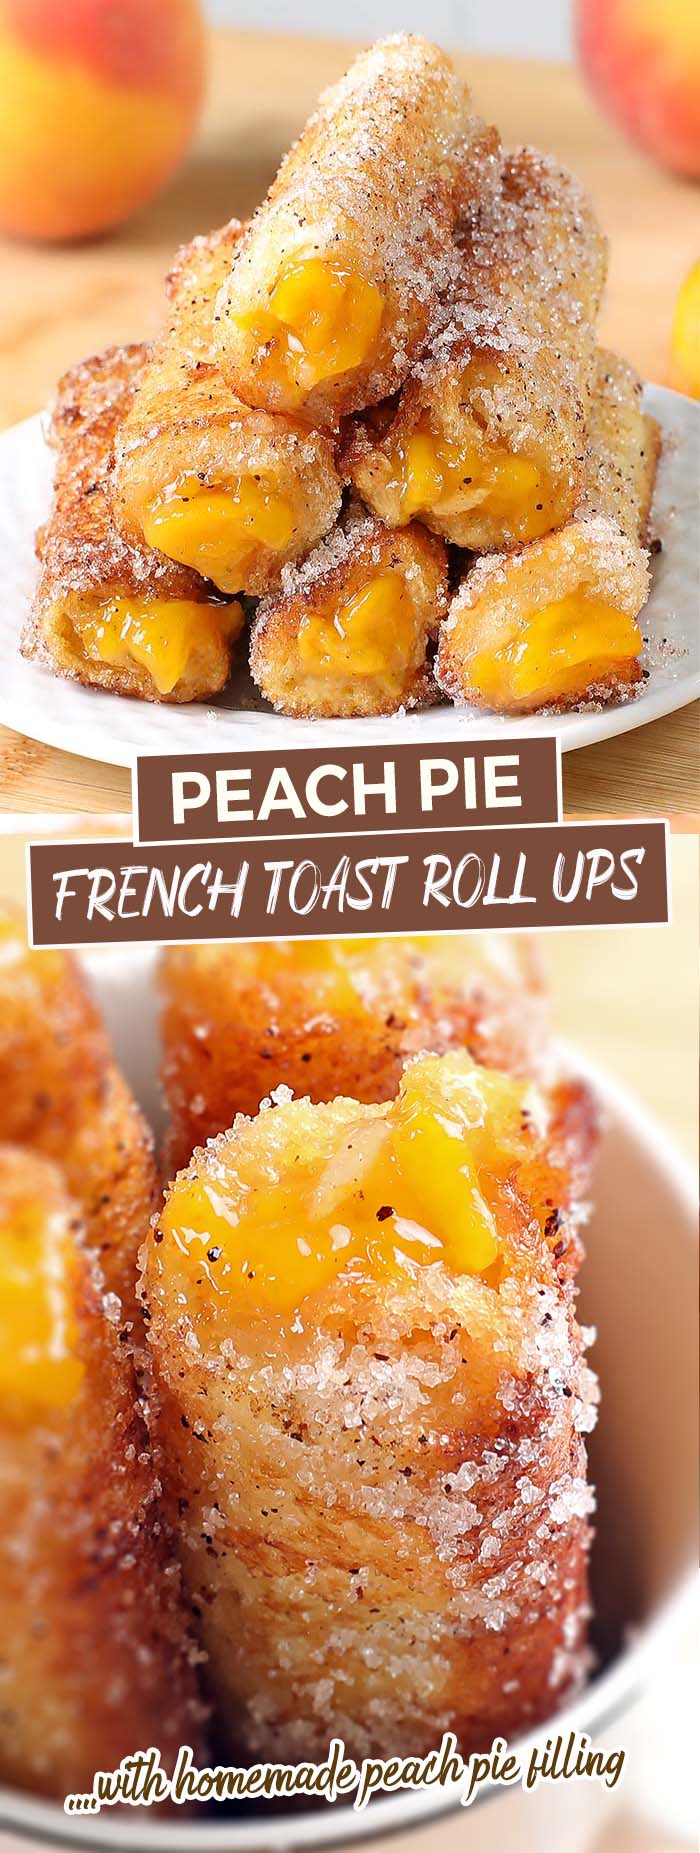 Tasty peach pie filling rolled inside the slice of bread, fried until golden brown and coated with cinnamon-sugar mixture. These delicious Peach Pie French Toast Roll-Ups are a creative breakfast treat for any day of the week!